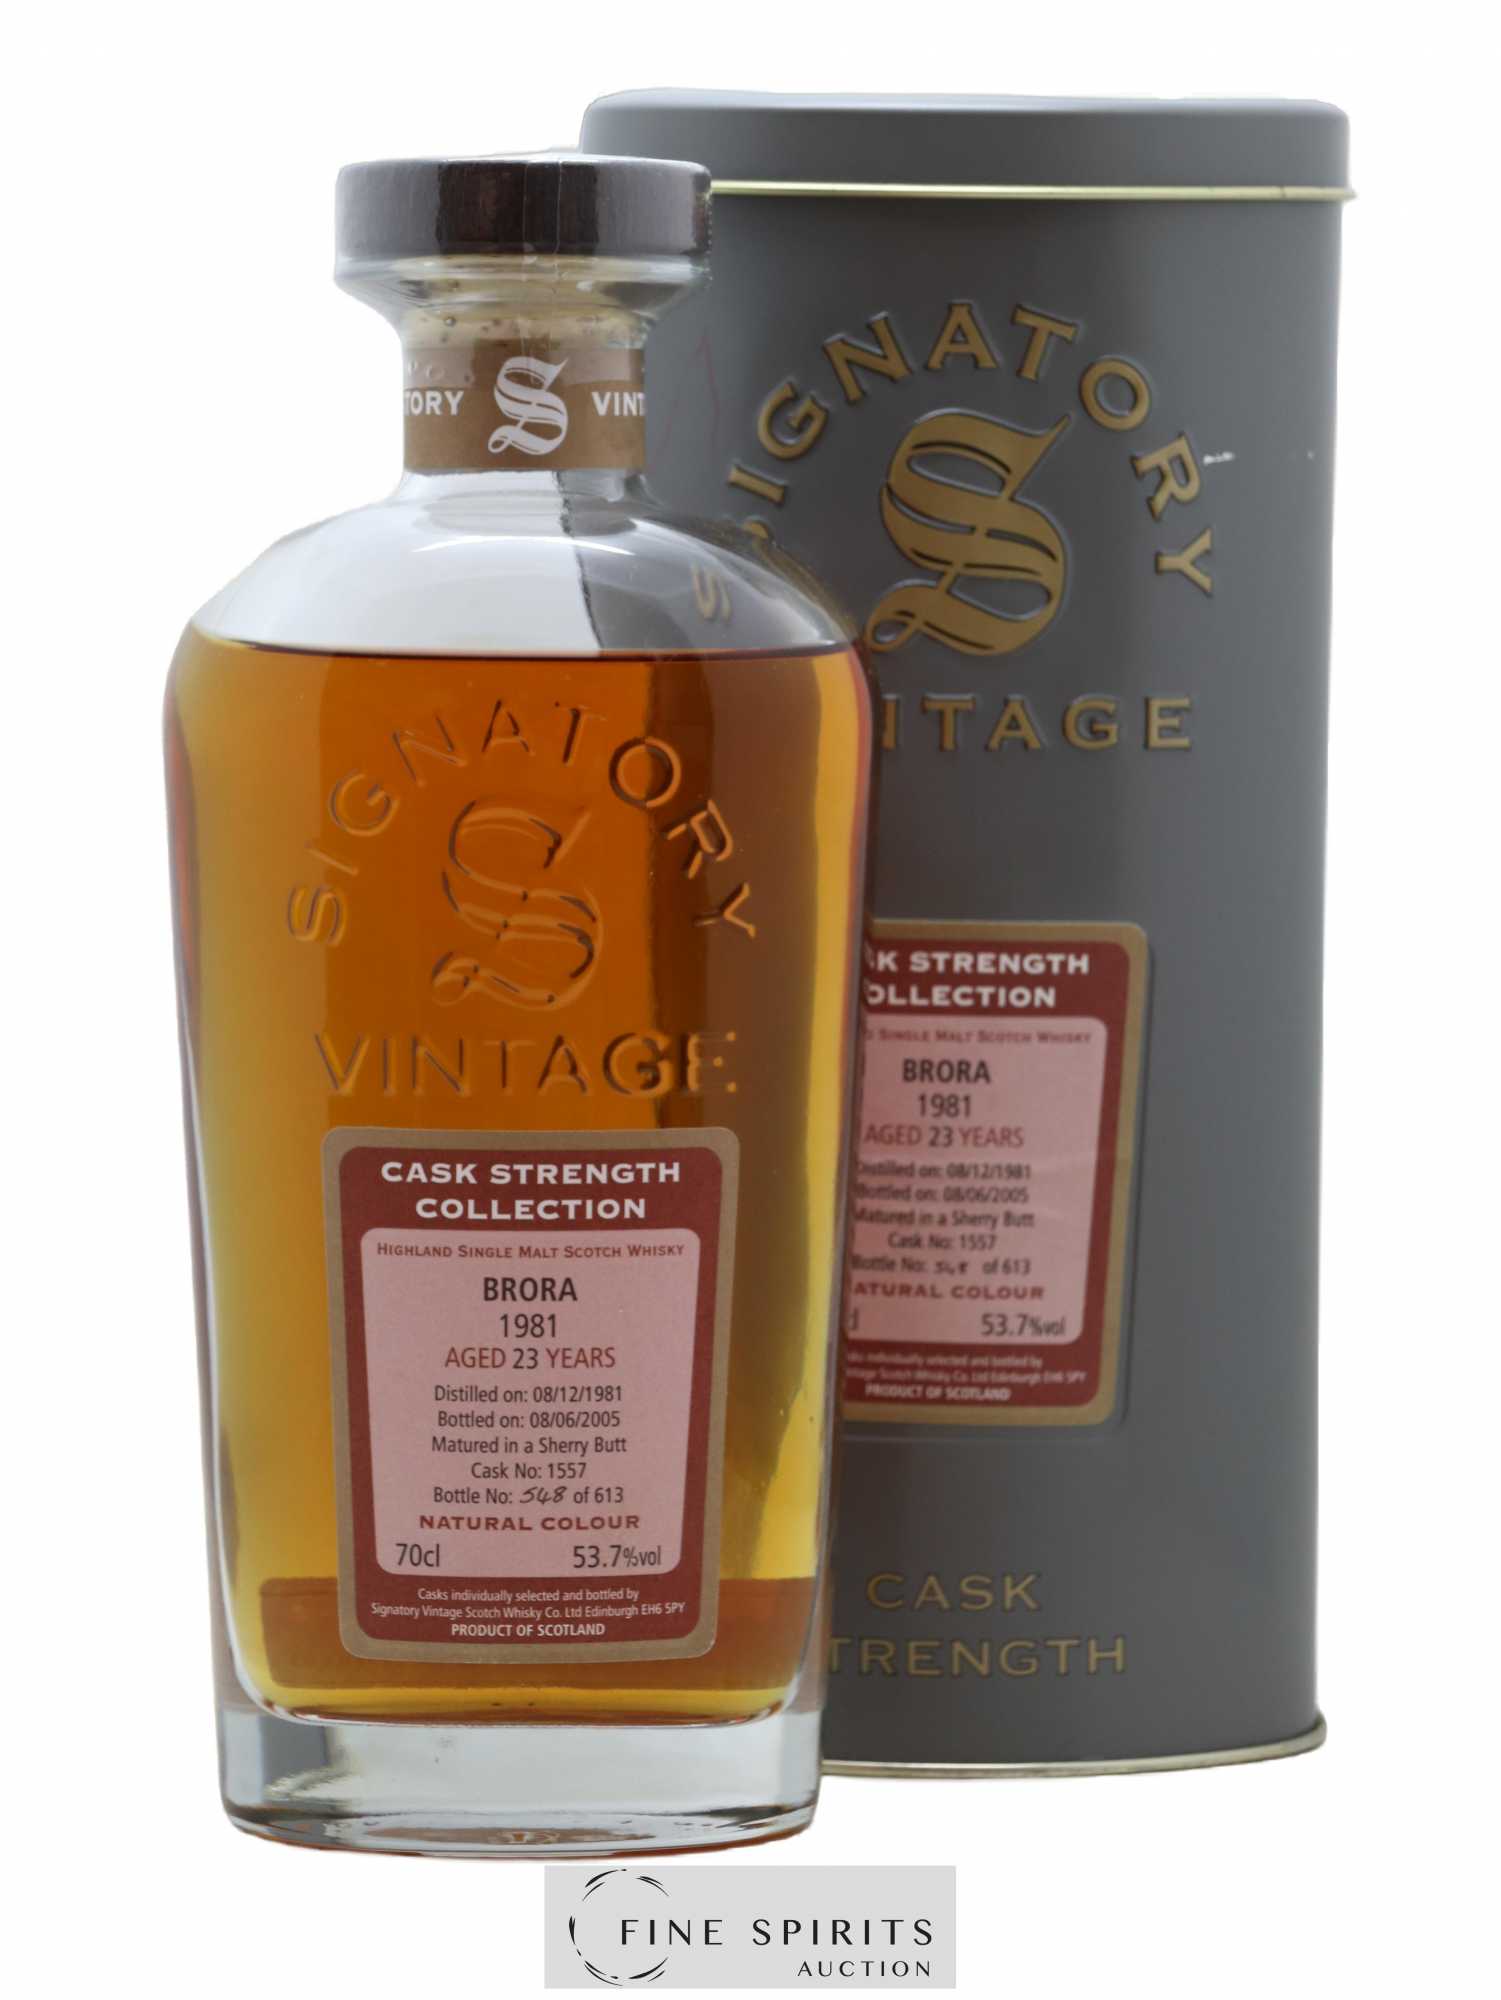 Brora 23 years 1981 Signatory Vintage Cask n°1557 - One of 613 - bottled 2005 Cask Strength Collection 